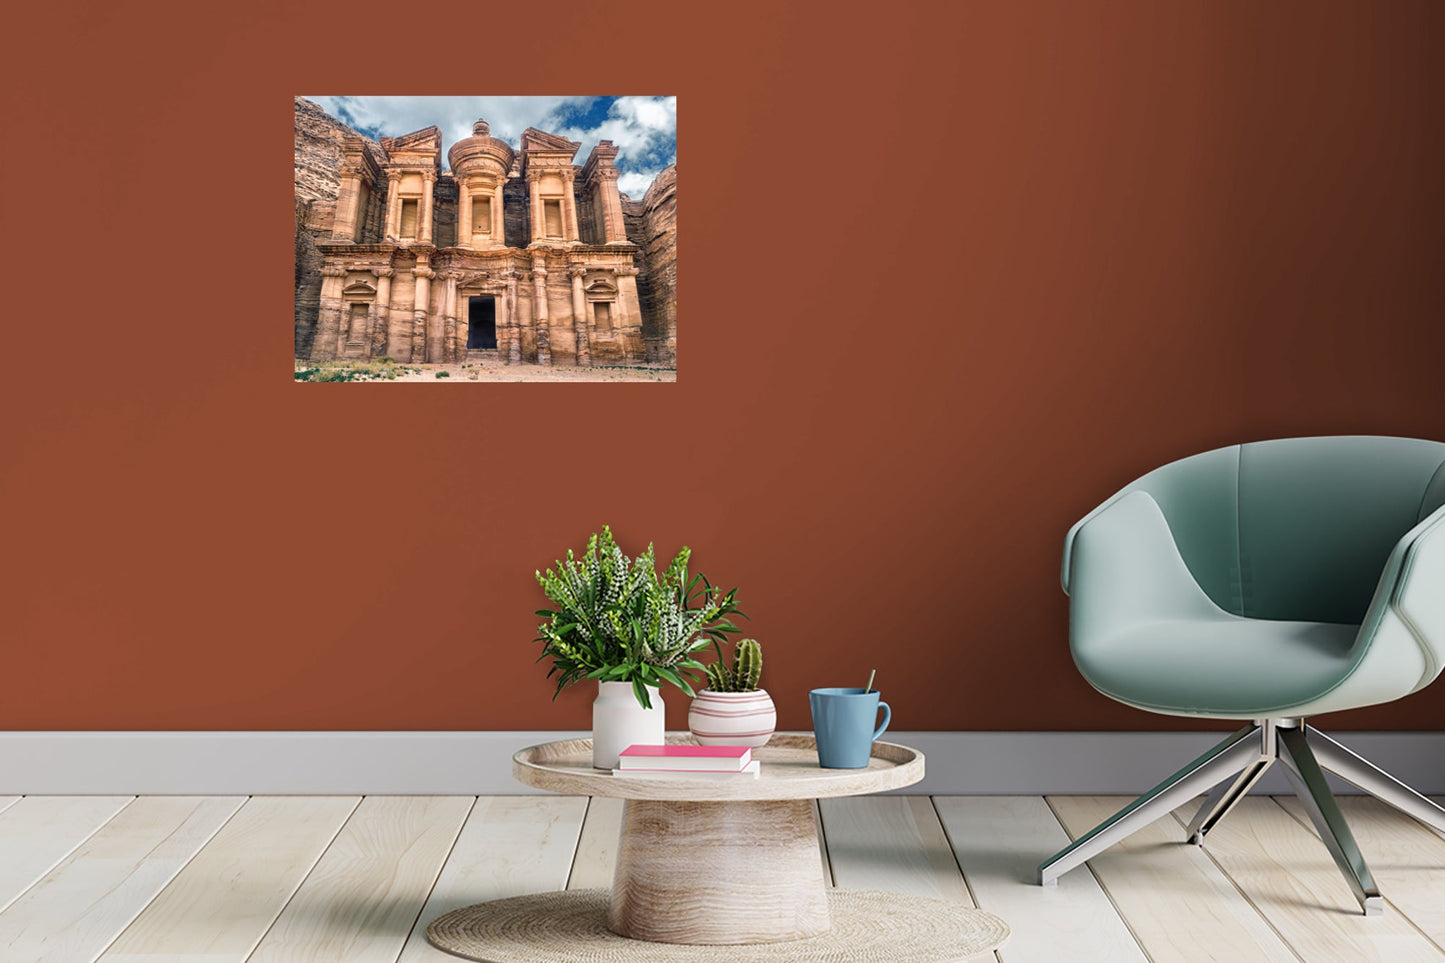 Popular Landmarks: Petra Realistic Poster - Removable Adhesive Decal